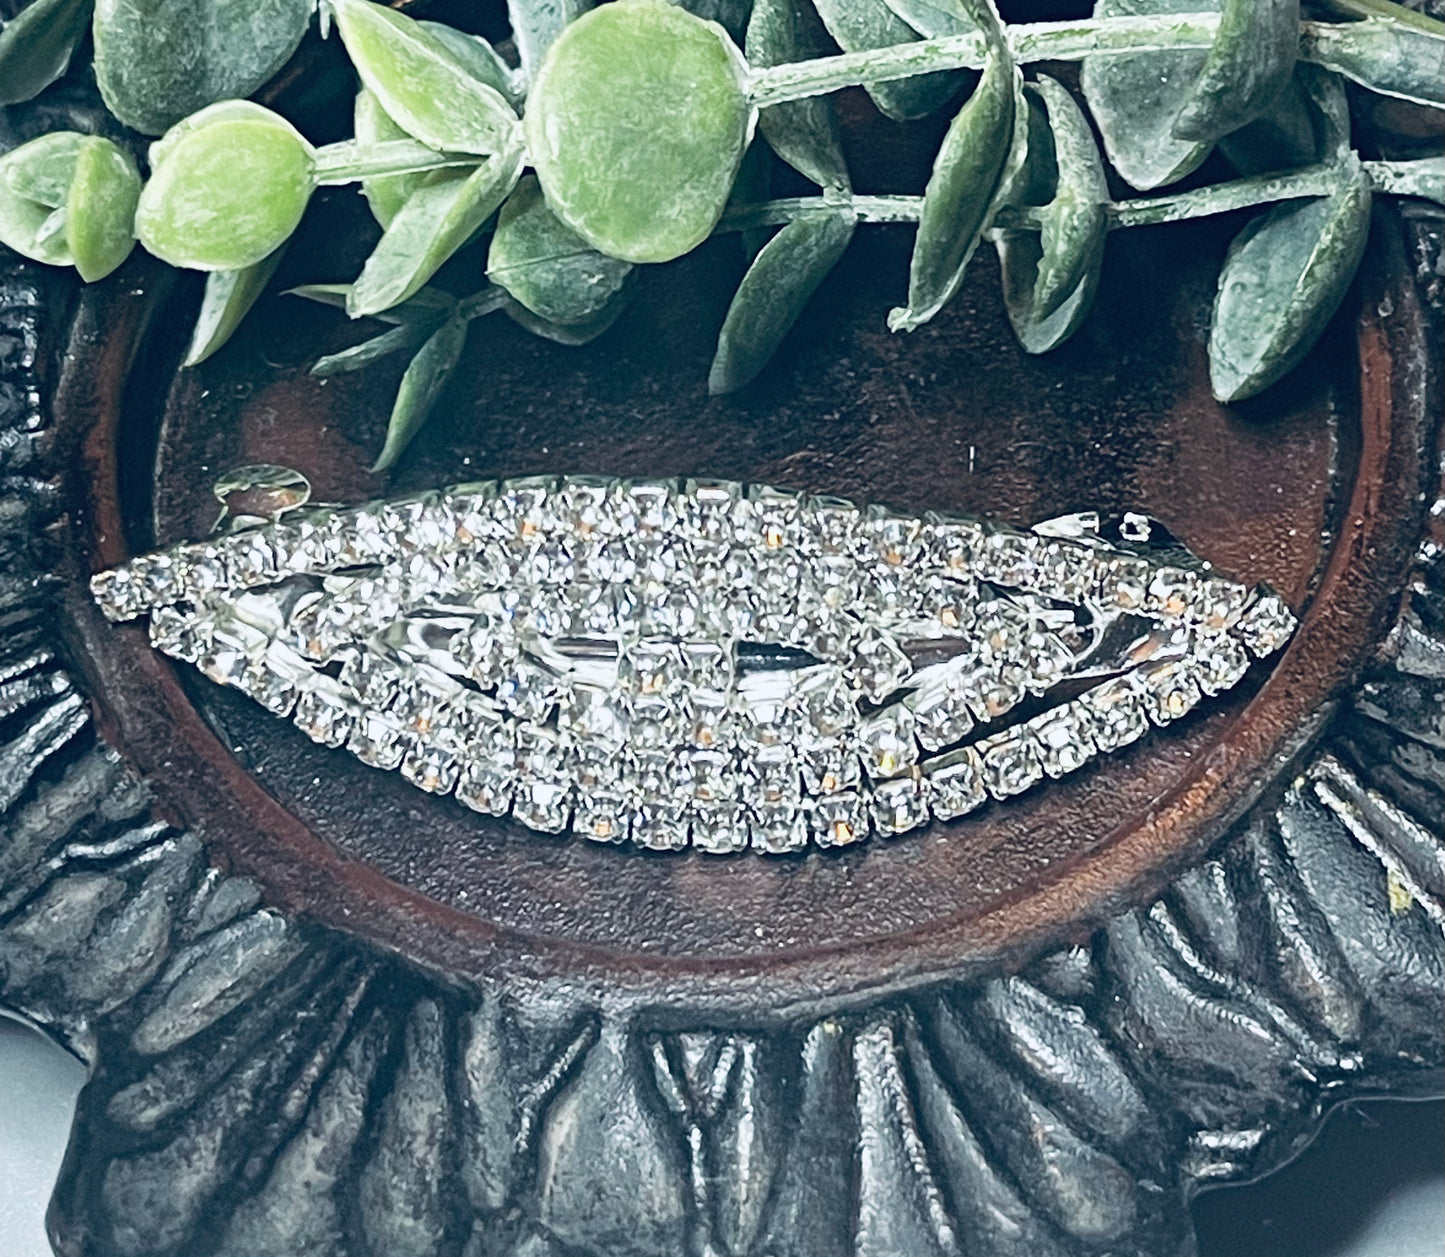 Clear Crystal rhinestone barrette approximately 3.0” silver tone formal hair accessories gift wedding bridesmaid Prom birthday gifts